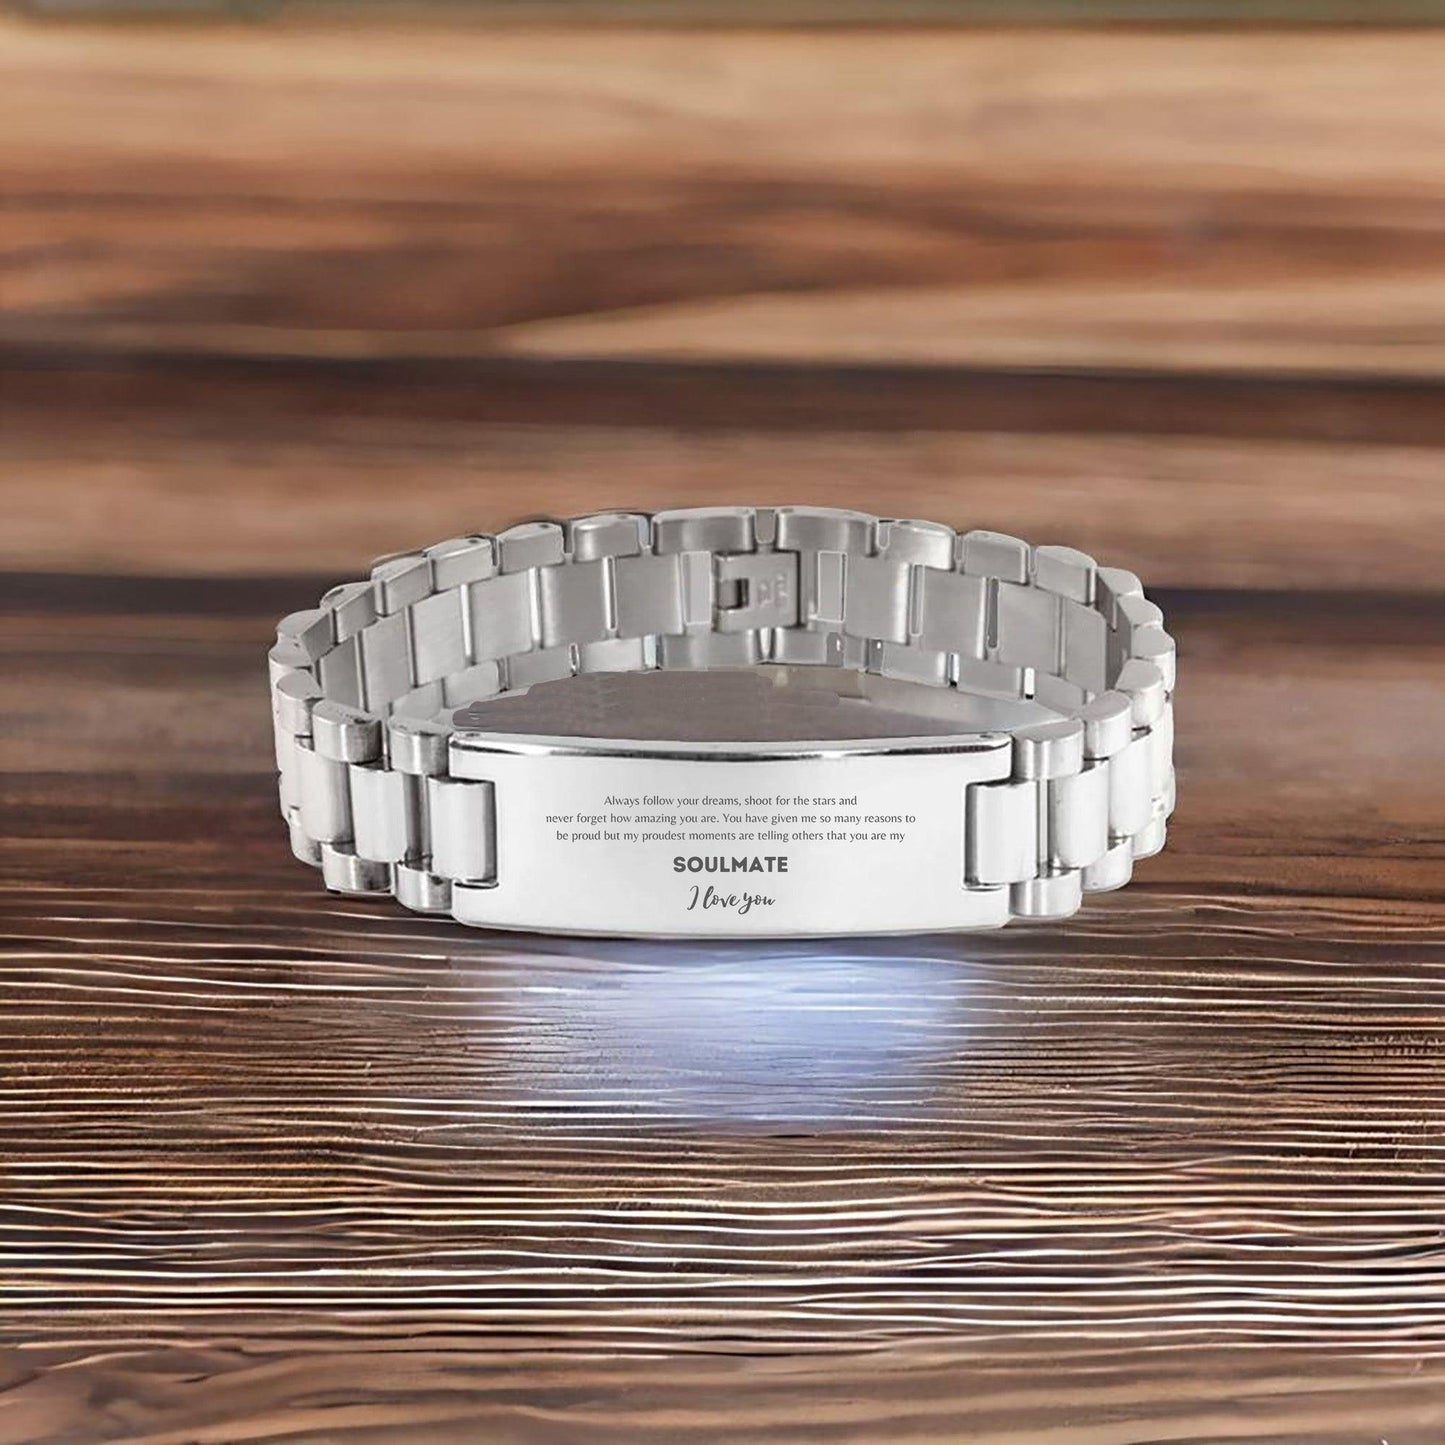 Motivational Soulmate Engraved Ladder Stainless Steel Bracelet - Always follow your dreams, never forget how amazing you are- Birthday, Christmas Holiday Gifts - Mallard Moon Gift Shop